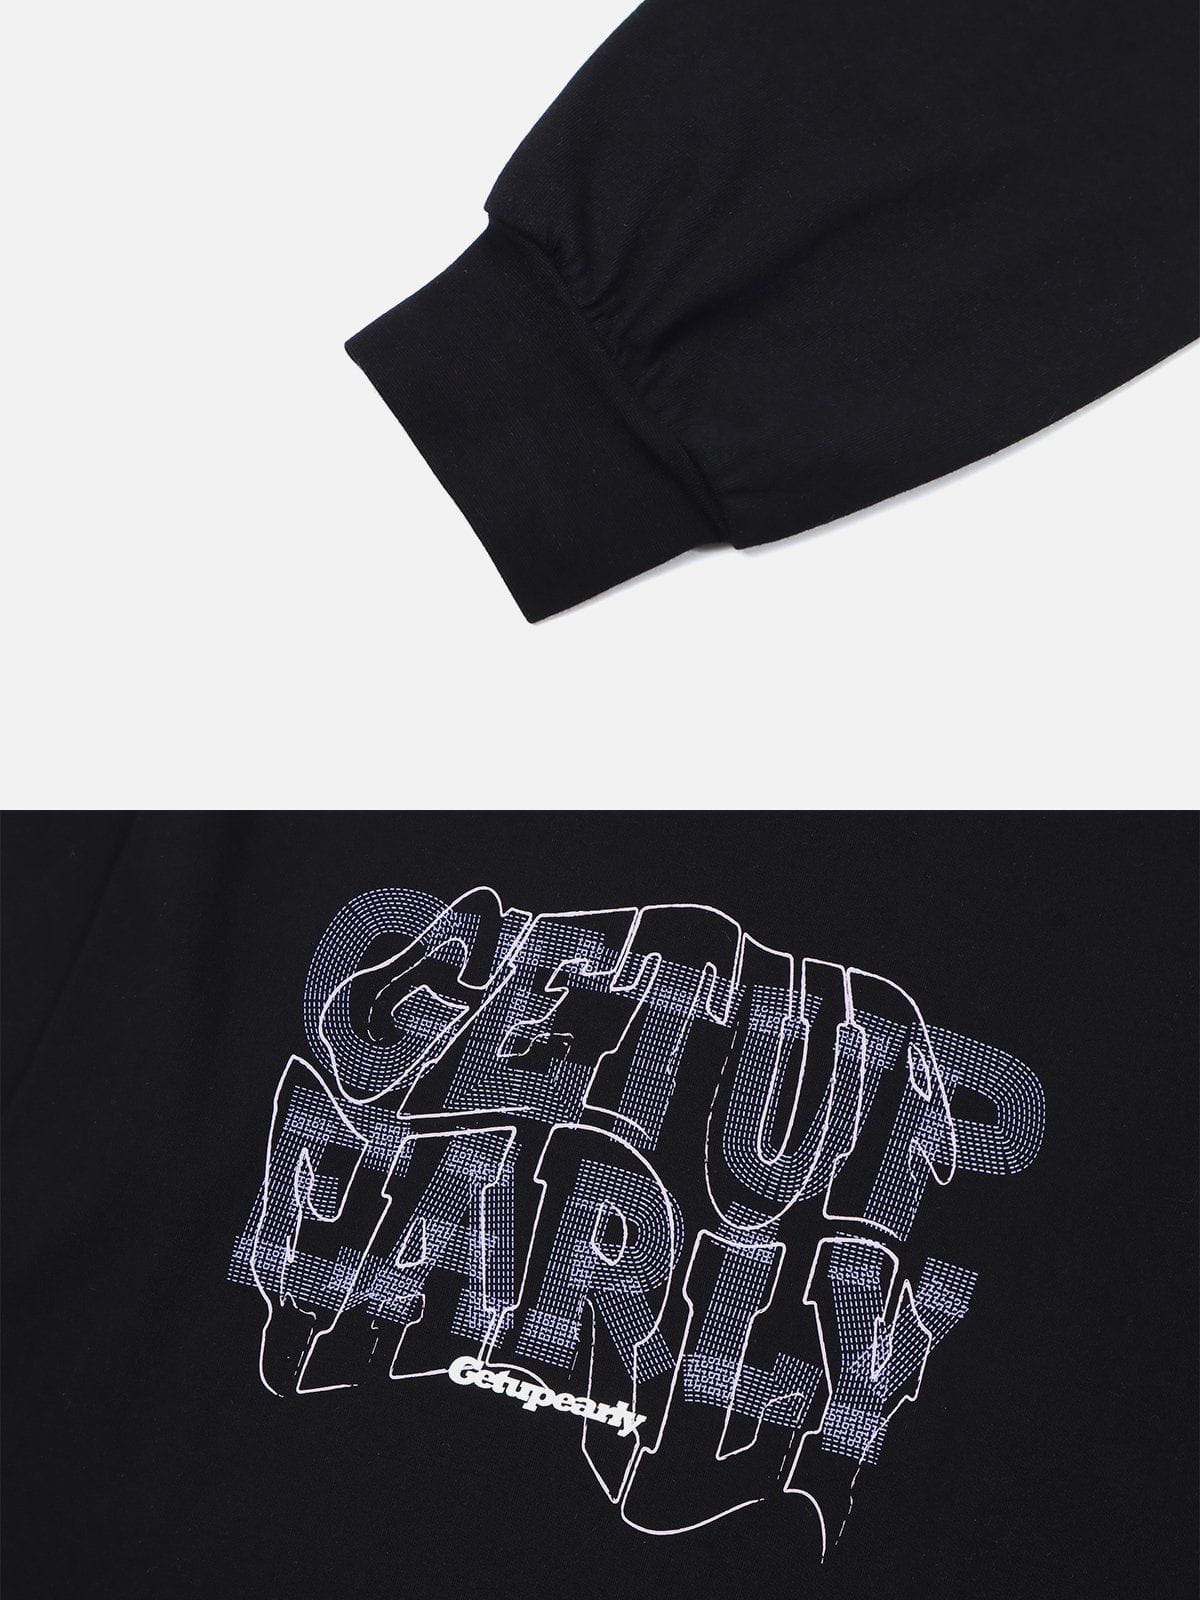 LUXENFY™ - "GETUP EARLY" Print Sweatshirt luxenfy.com